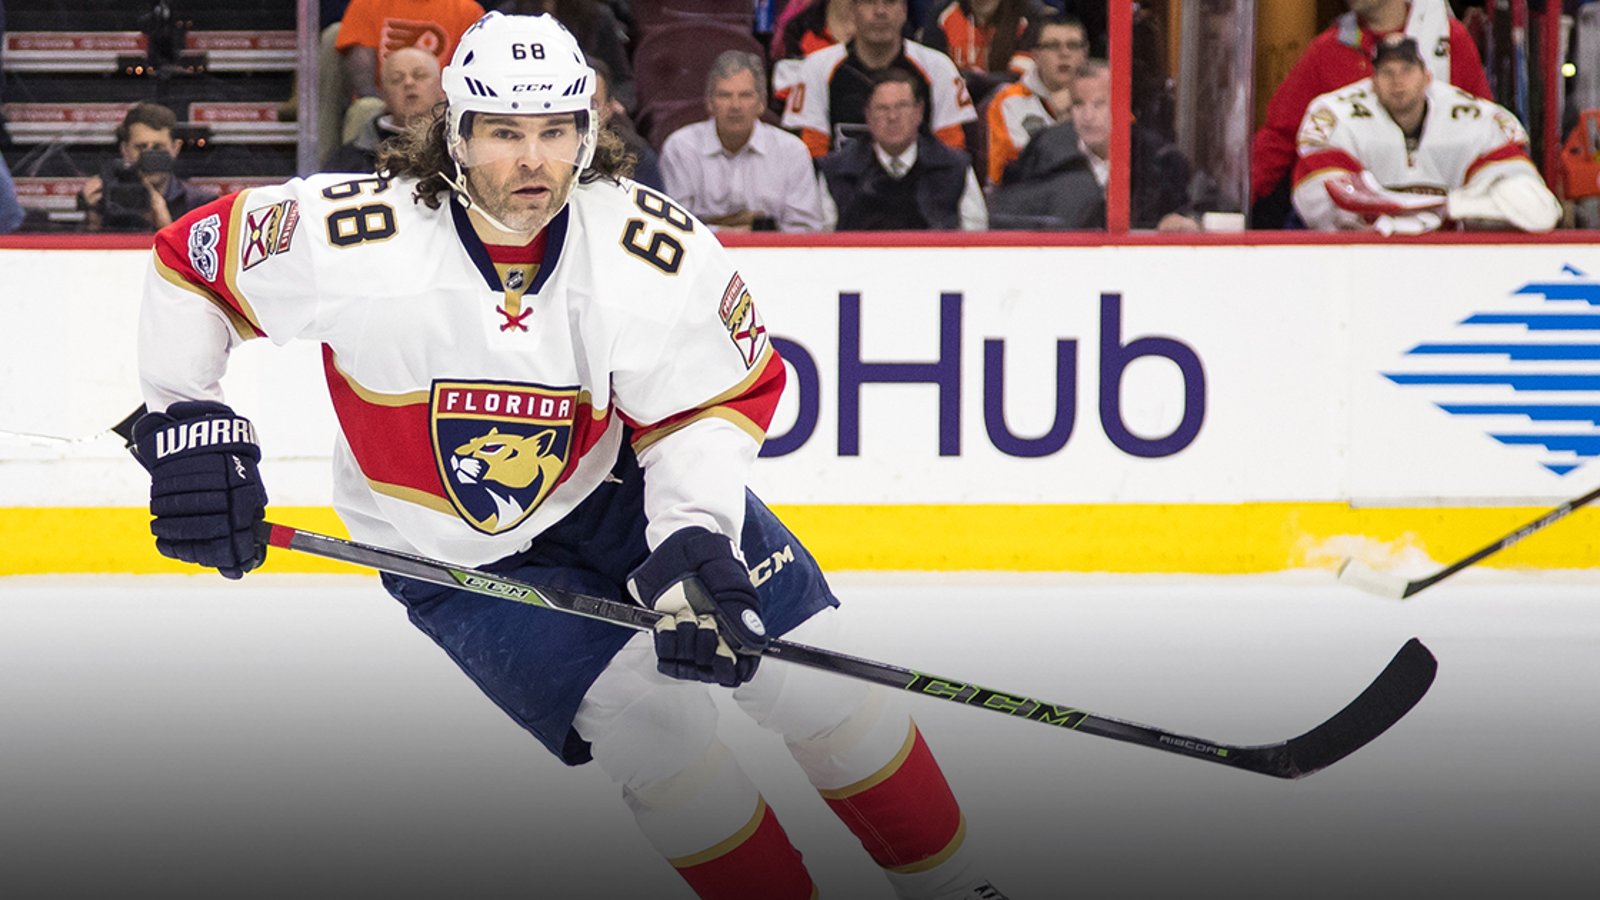 Report: One obstacle preventing Flames from signing Jagr